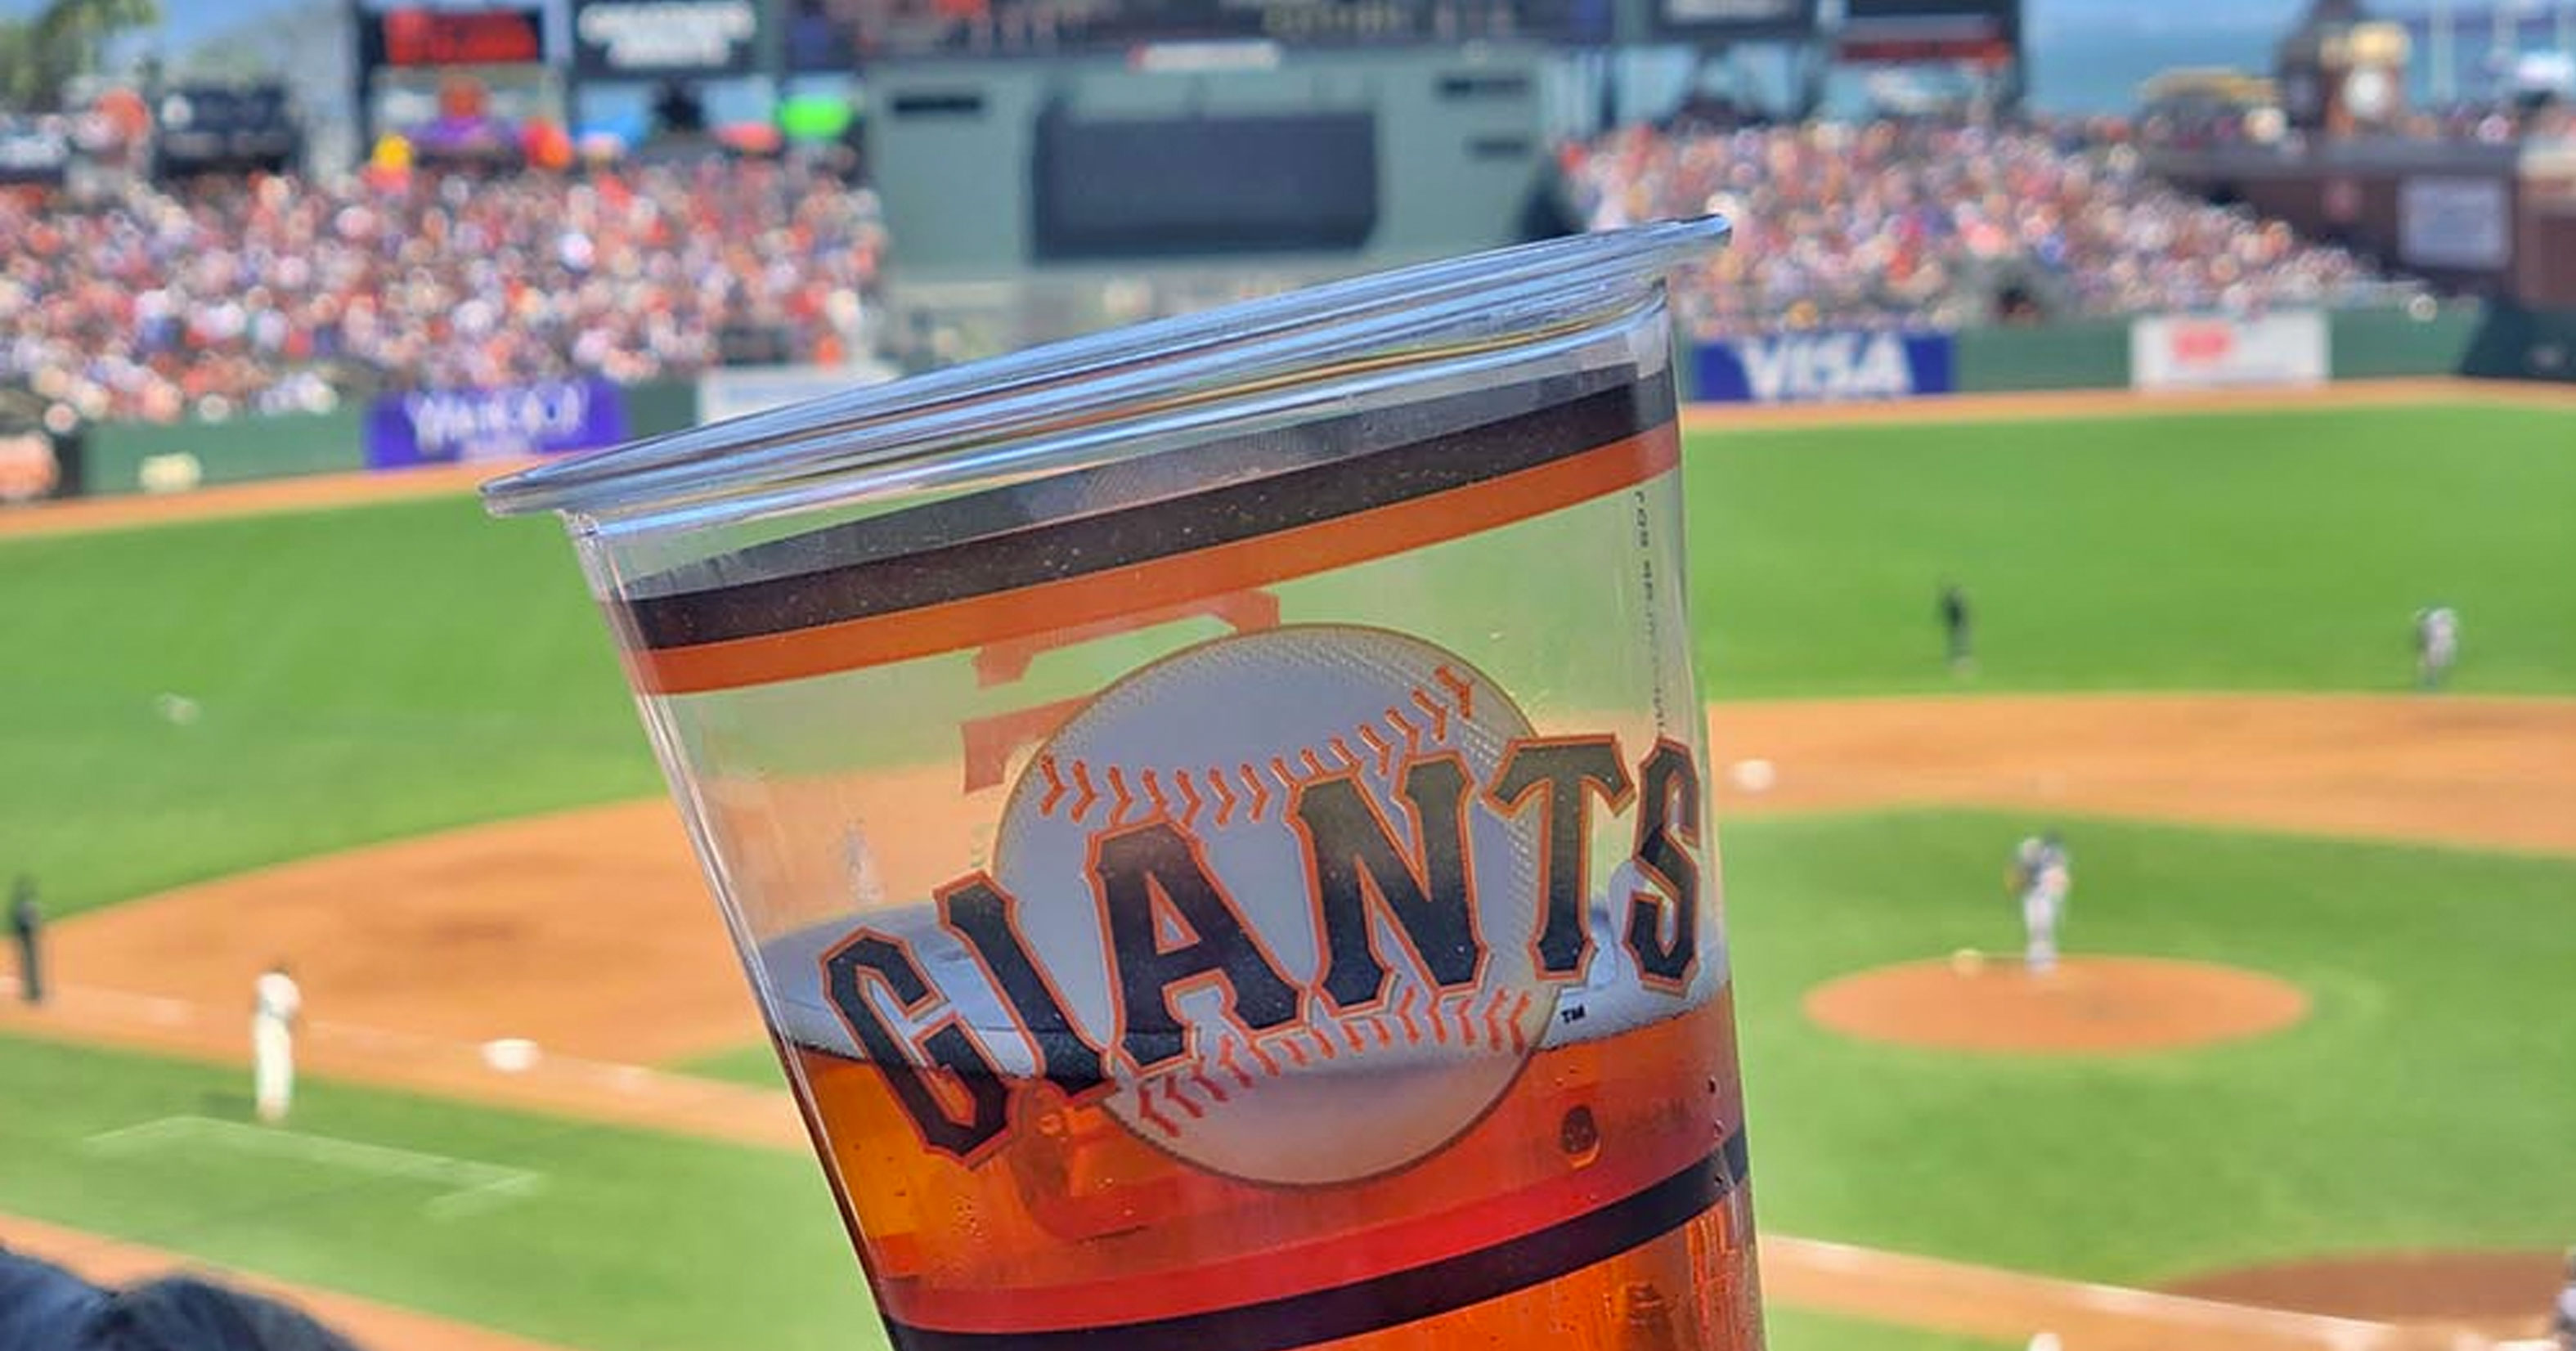 San Francisco Giants Now Charging $20 For Beer At Stadium During Games